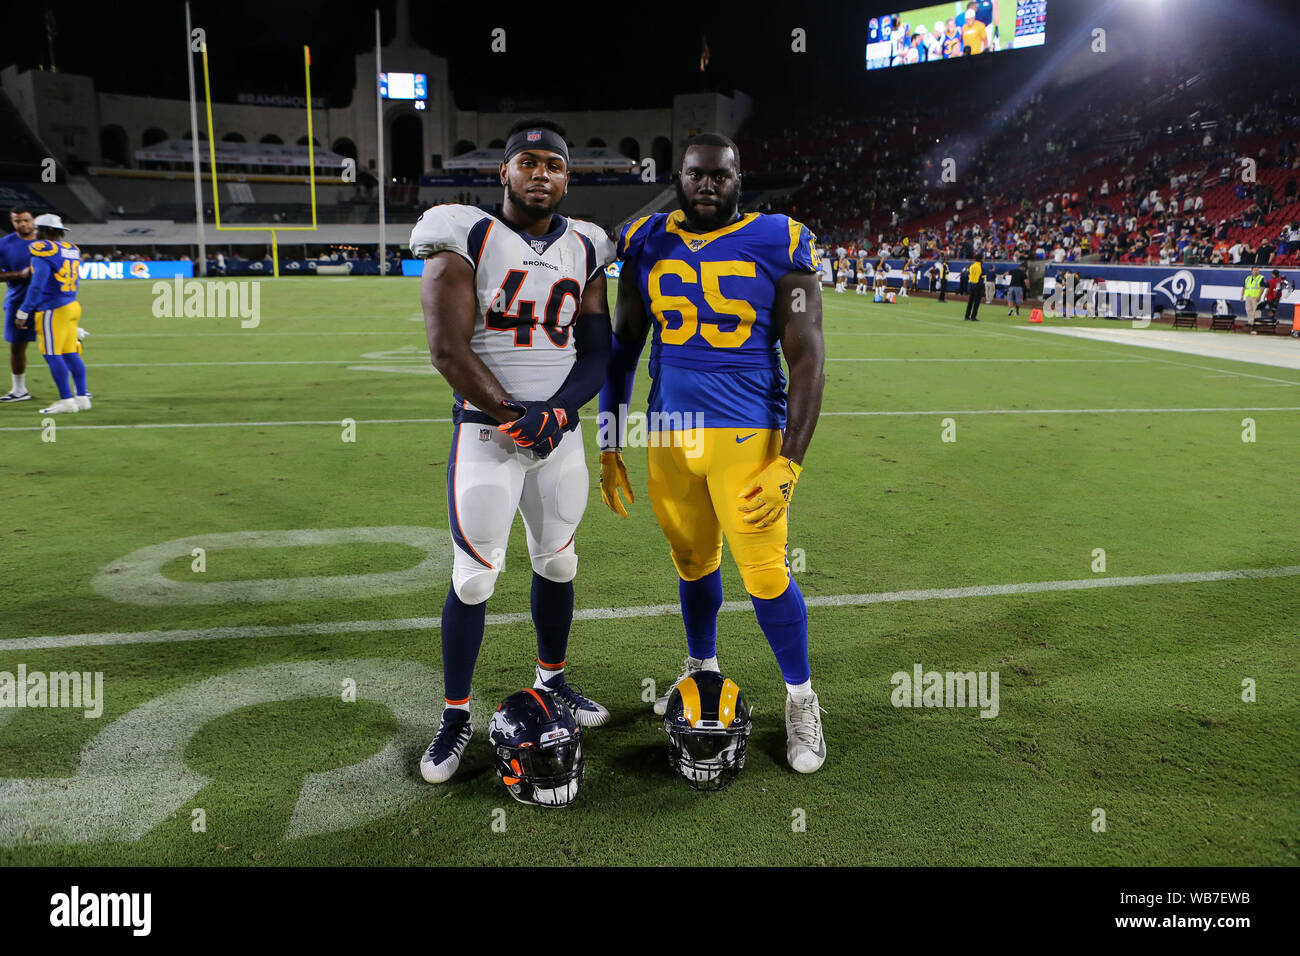 Los Angeles, CA., USA. 24th August, 2019. Narbonne High School graduates Denver Broncos linebacker Keishawn Bierria #40 and Los Angeles Rams defensive tackle Boogie Roberts #65 after the NFL game between Denver Broncos vs Los Angeles Rams at the Los Angeles Memorial Coliseum in Los Angeles, Ca on August 24, 2019. Jevone Moore Credit: Cal Sport Media/Alamy Live News Stock Photo